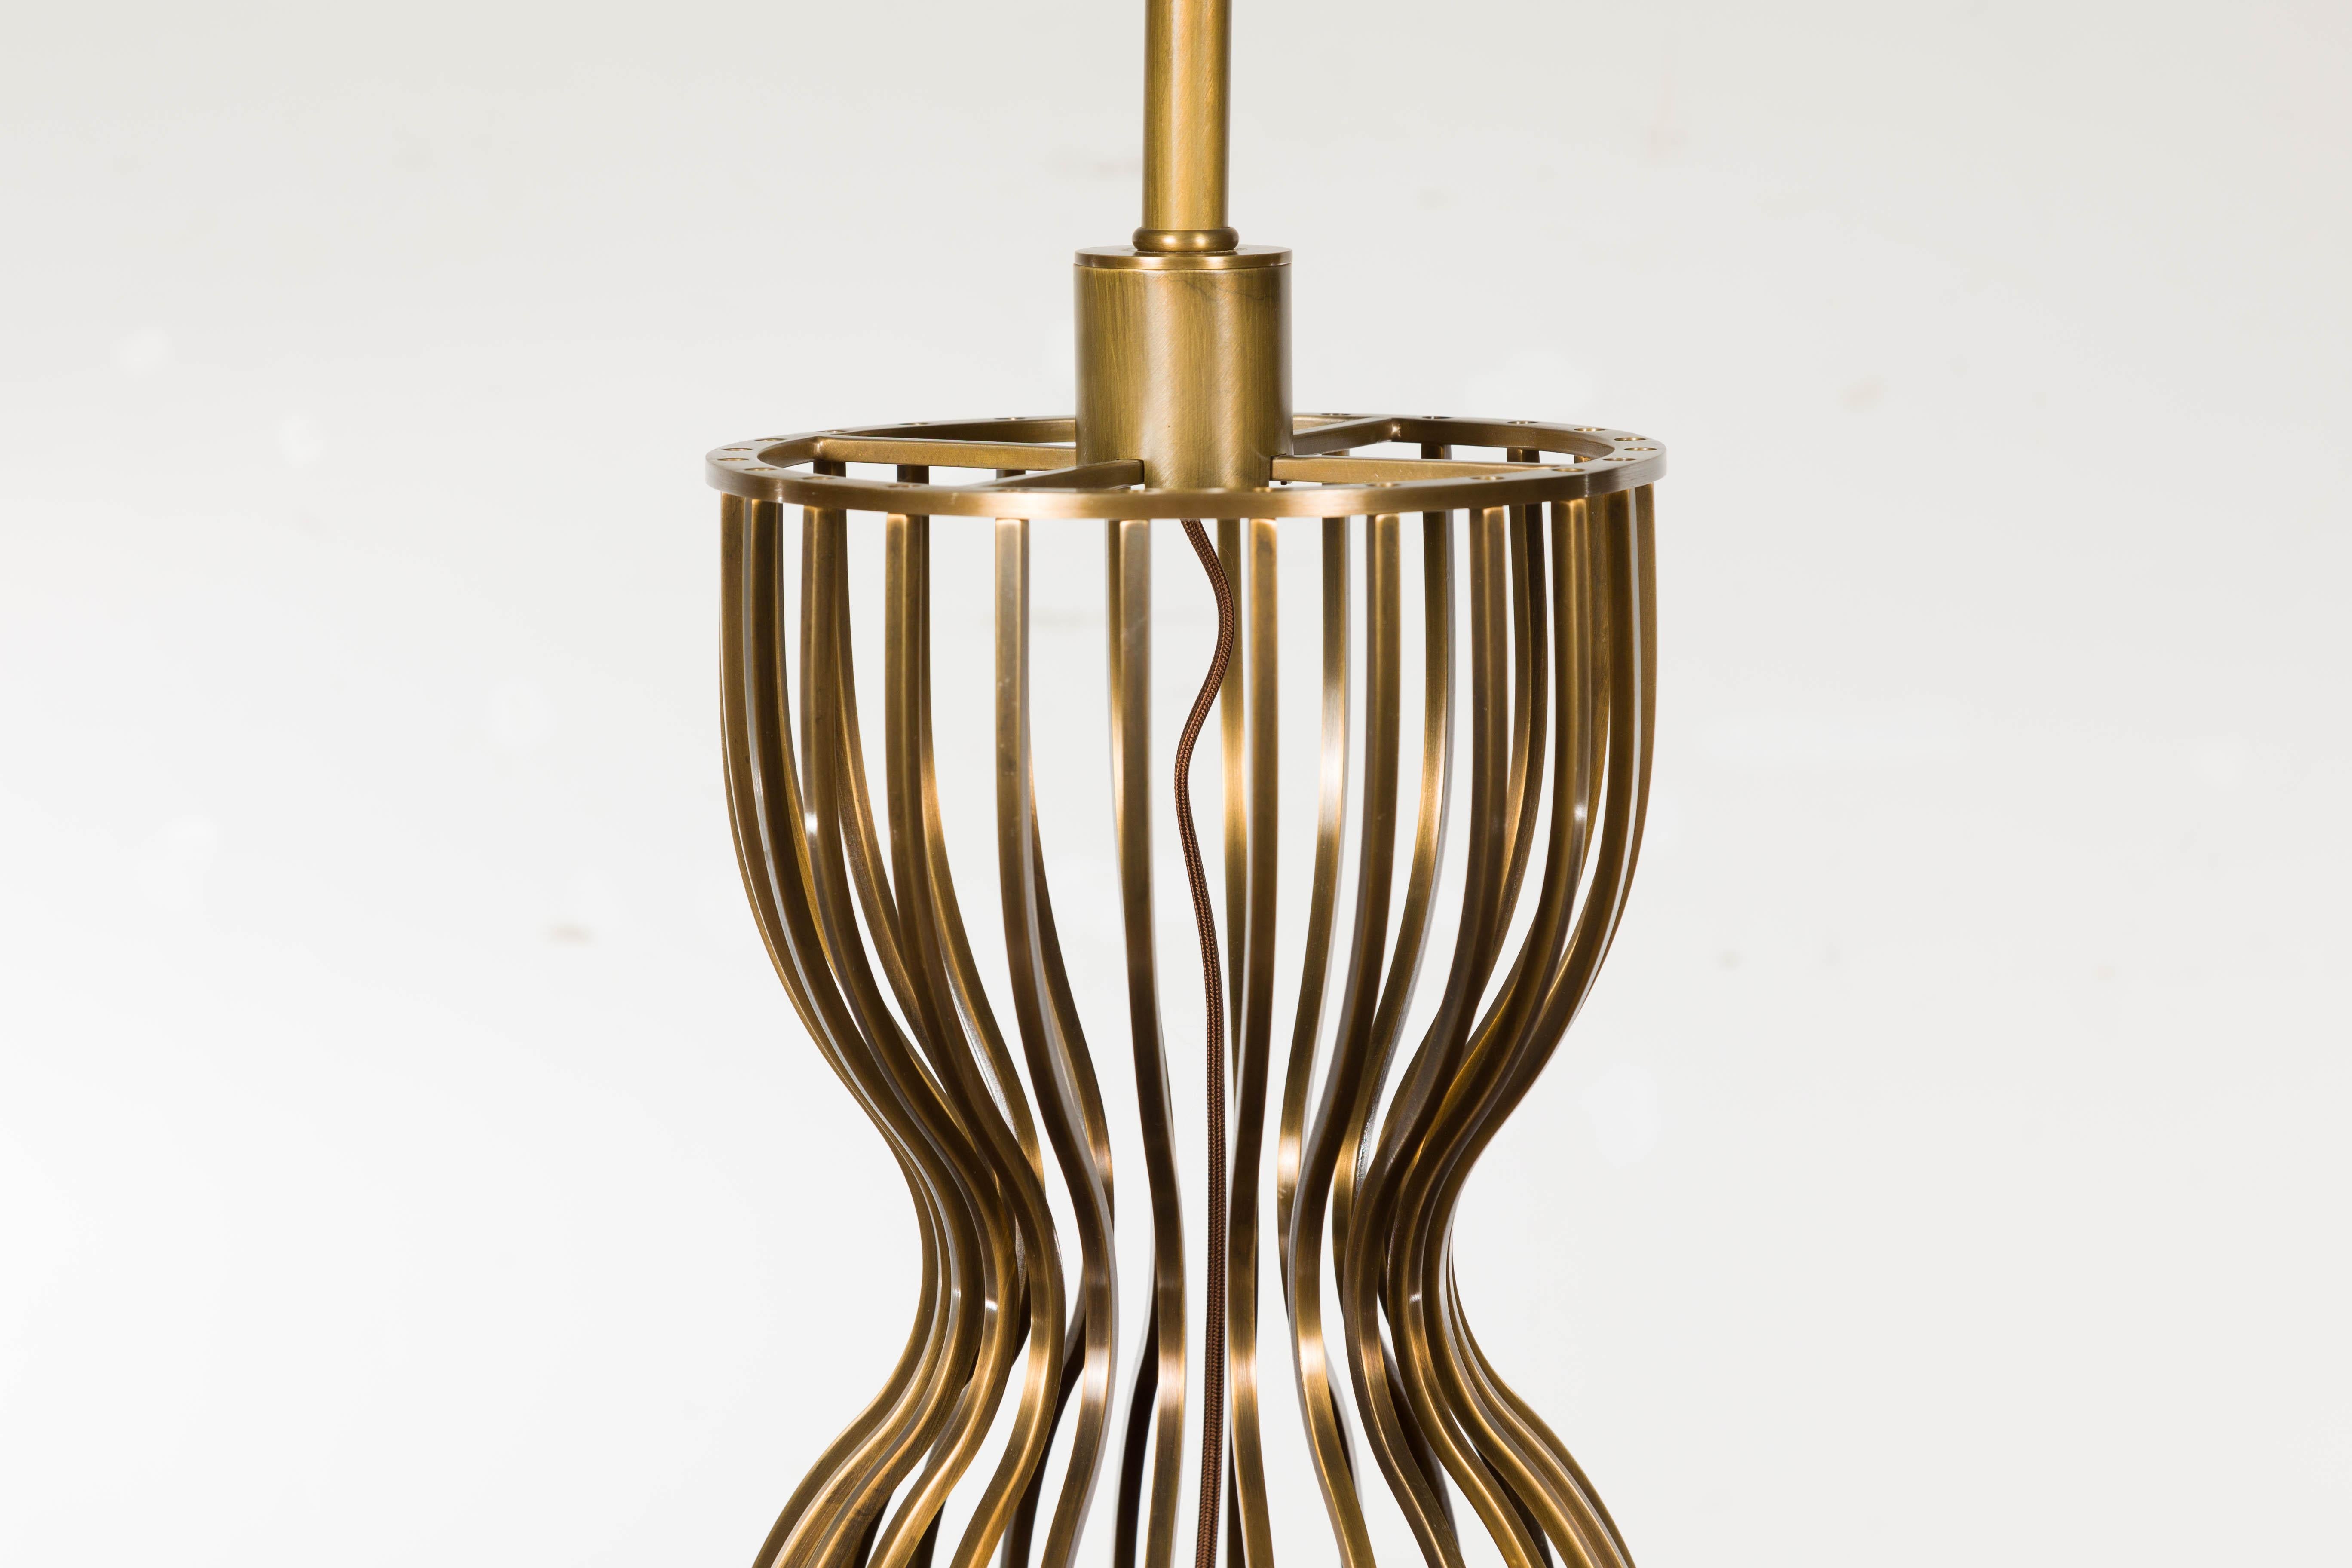 Midcentury Italian Brass Hourglass Shaped Single Light Lamp, US Wired For Sale 2